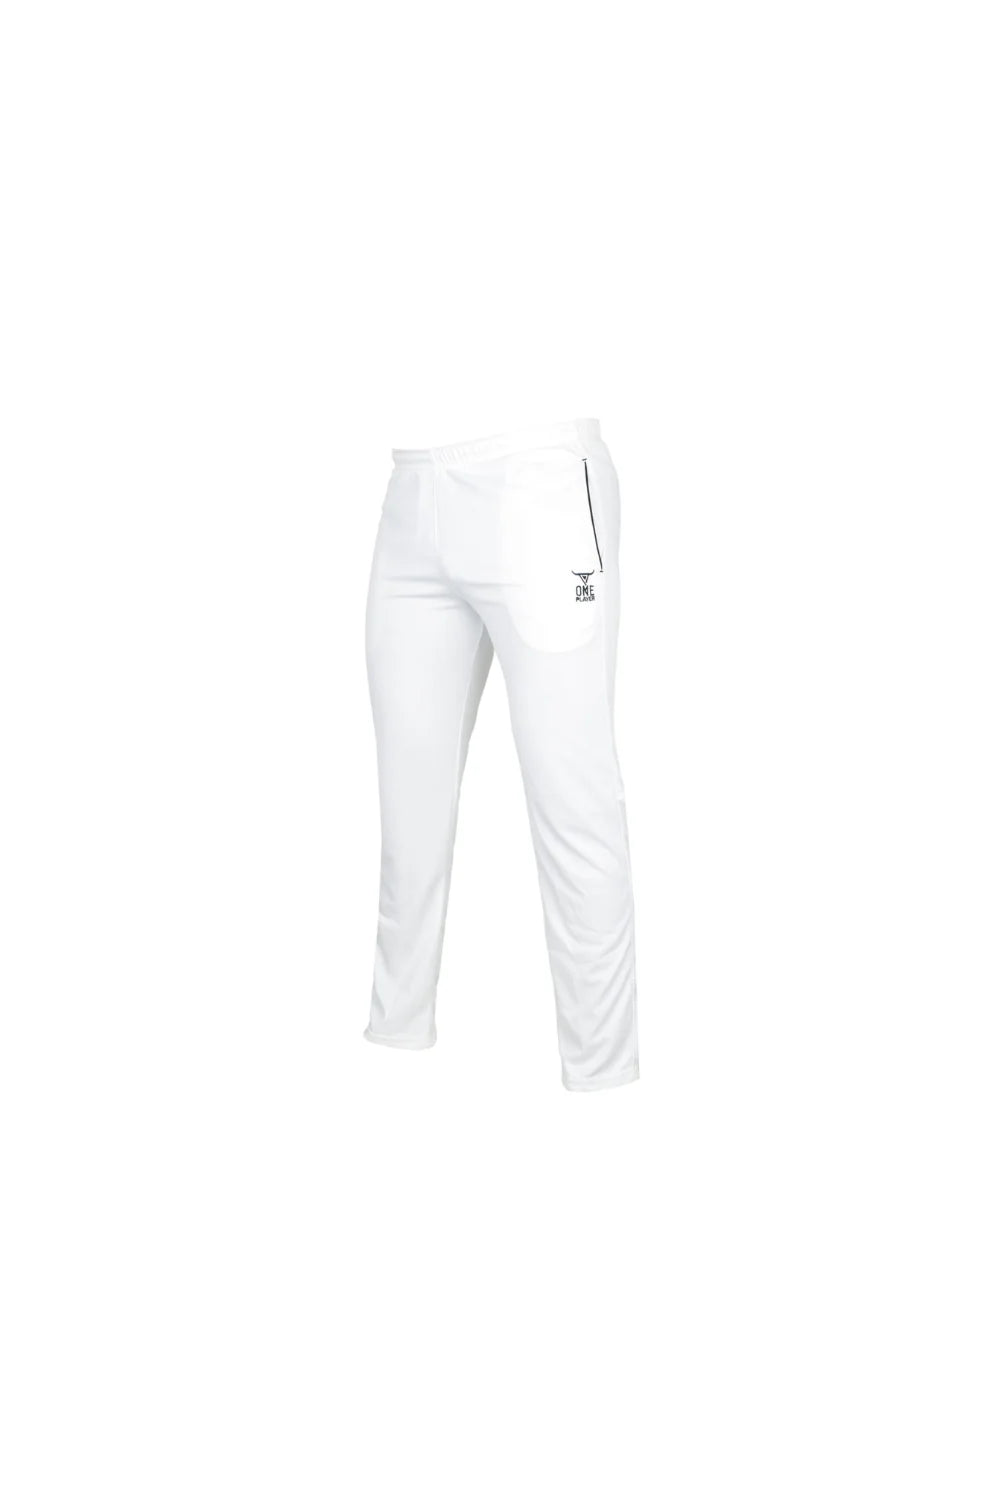 SS Player Cricket Trouser White  Small  Amazonin Clothing  Accessories